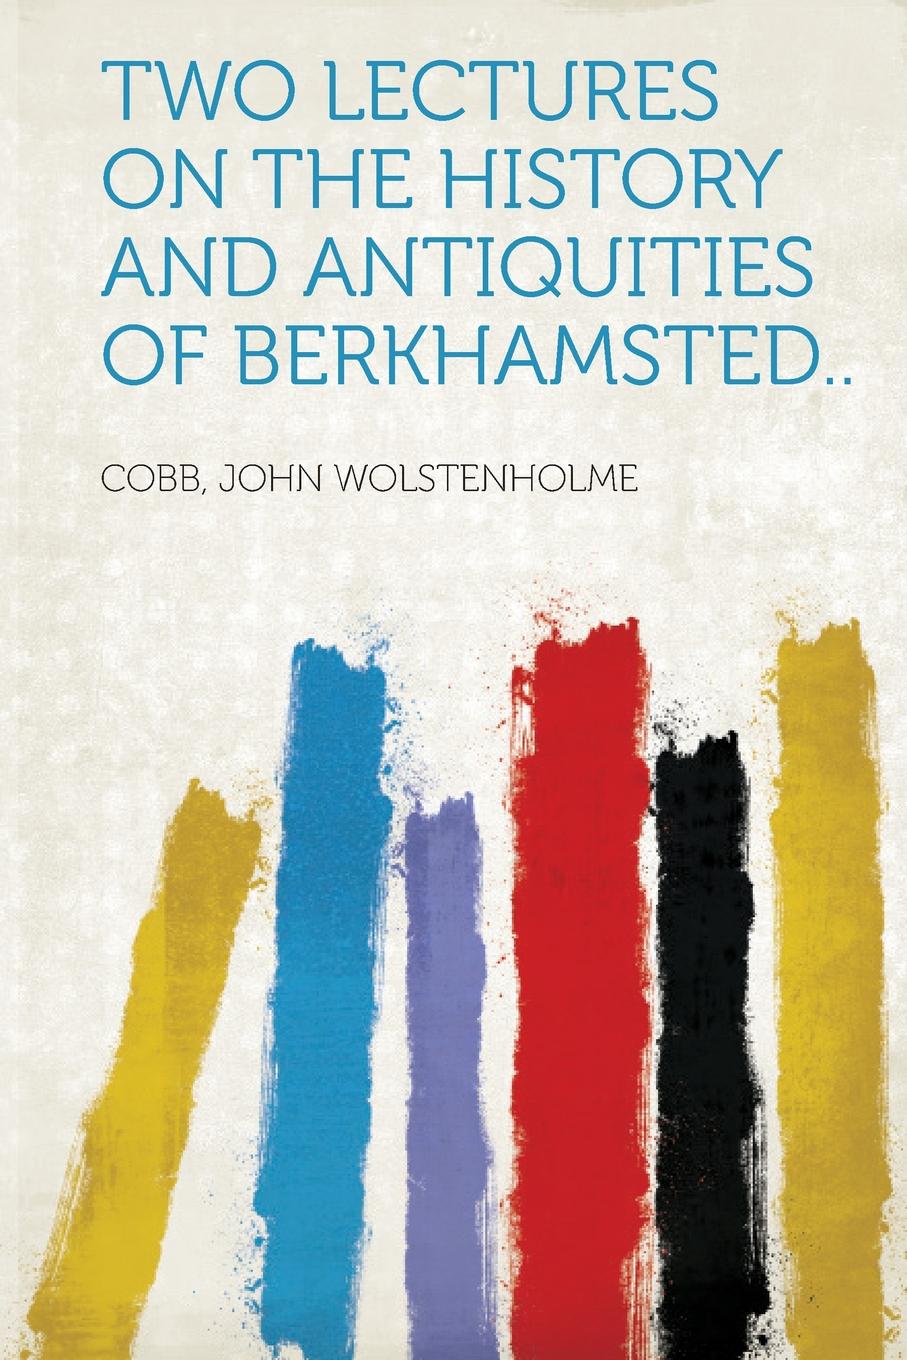 Two Lectures on the History and Antiquities of Berkhamsted..